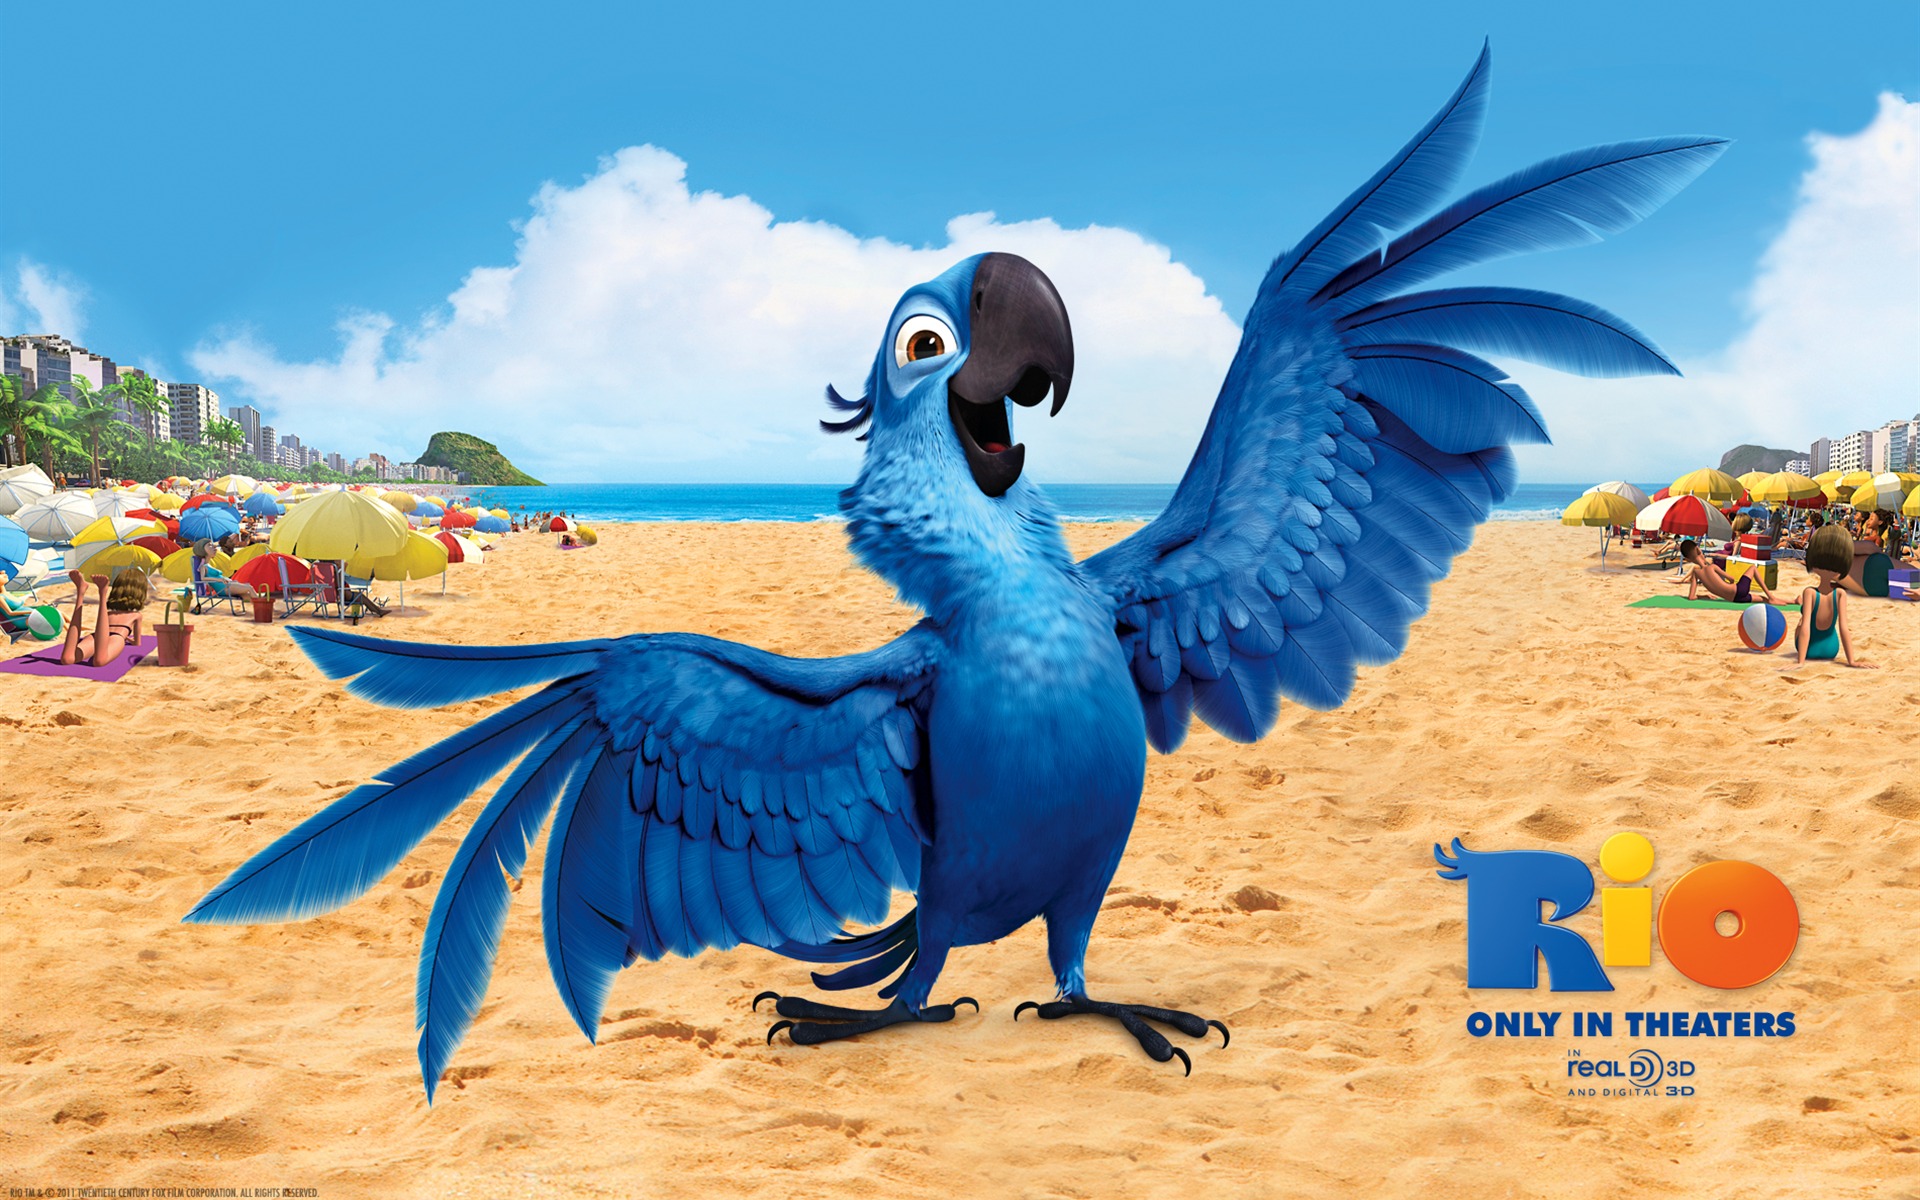 Rio 2011 wallpapers #4 - 1920x1200